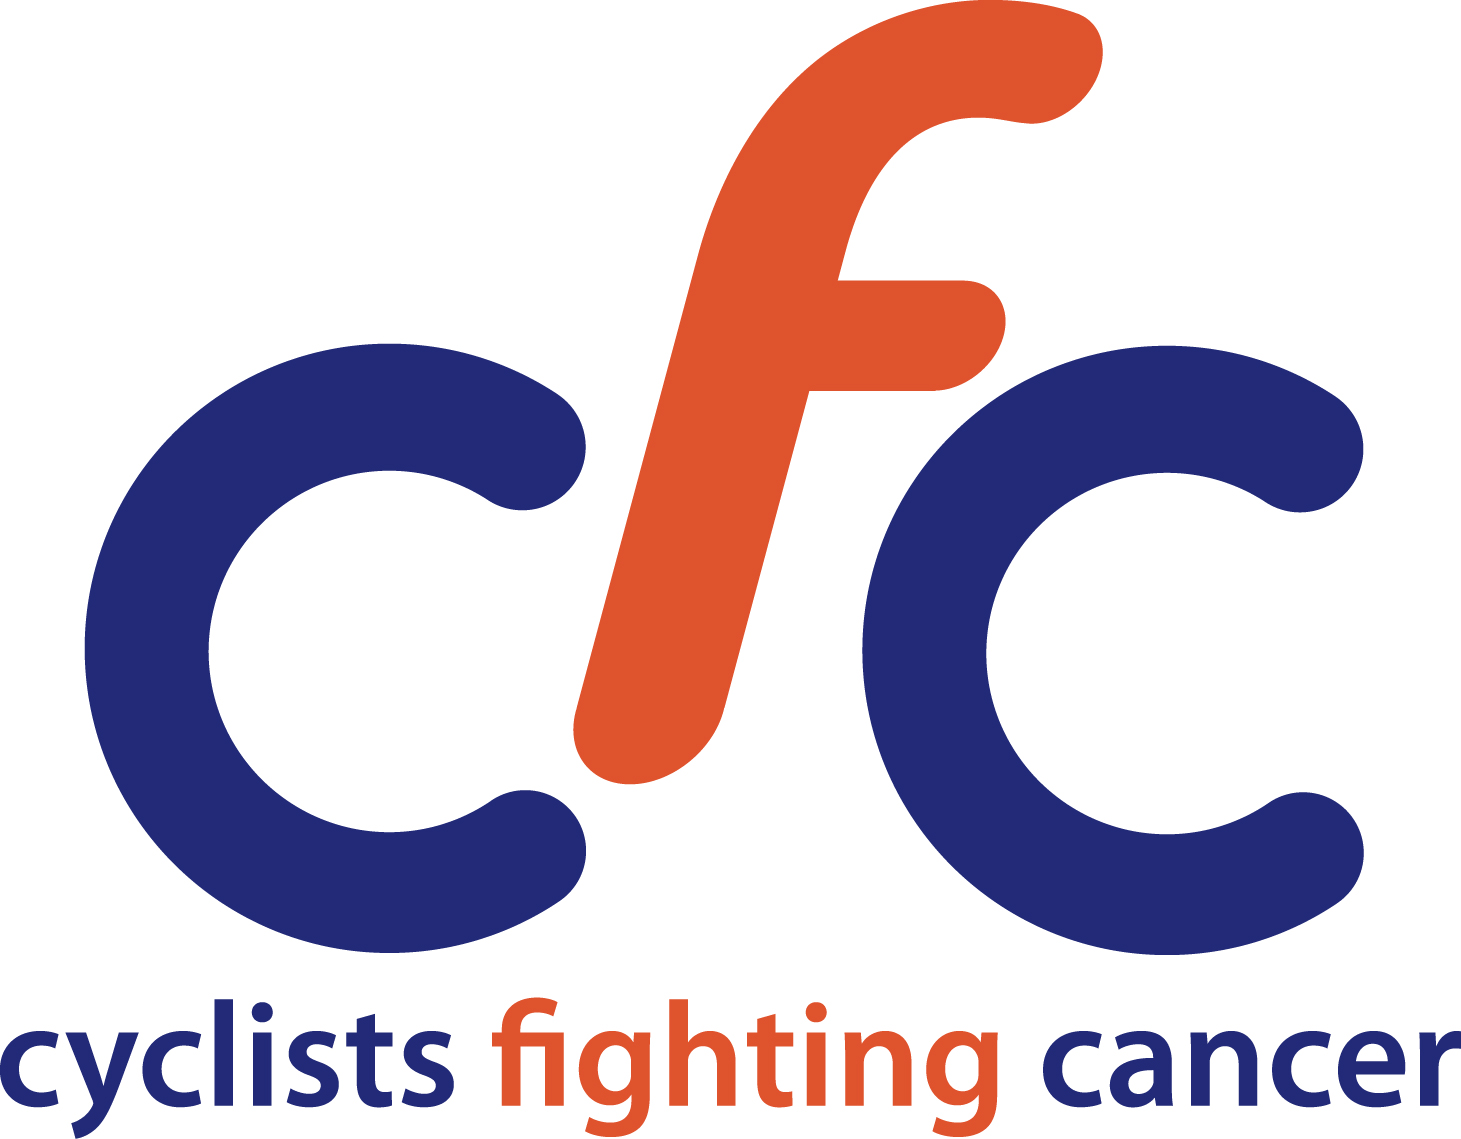 Cyclists Fighting Cancer